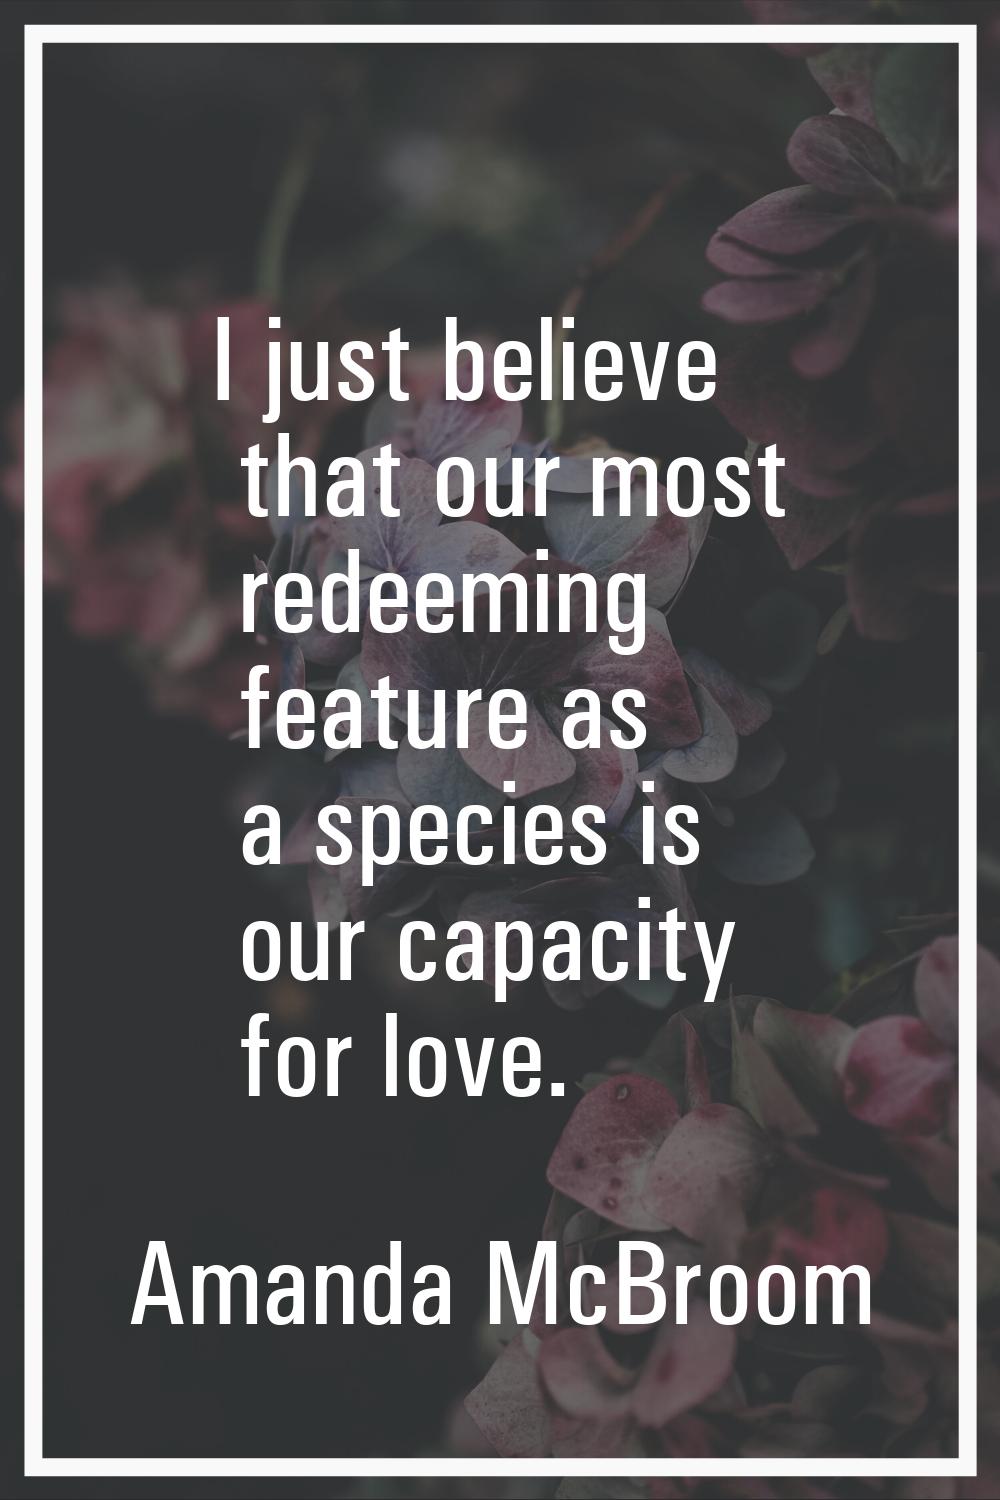 I just believe that our most redeeming feature as a species is our capacity for love.